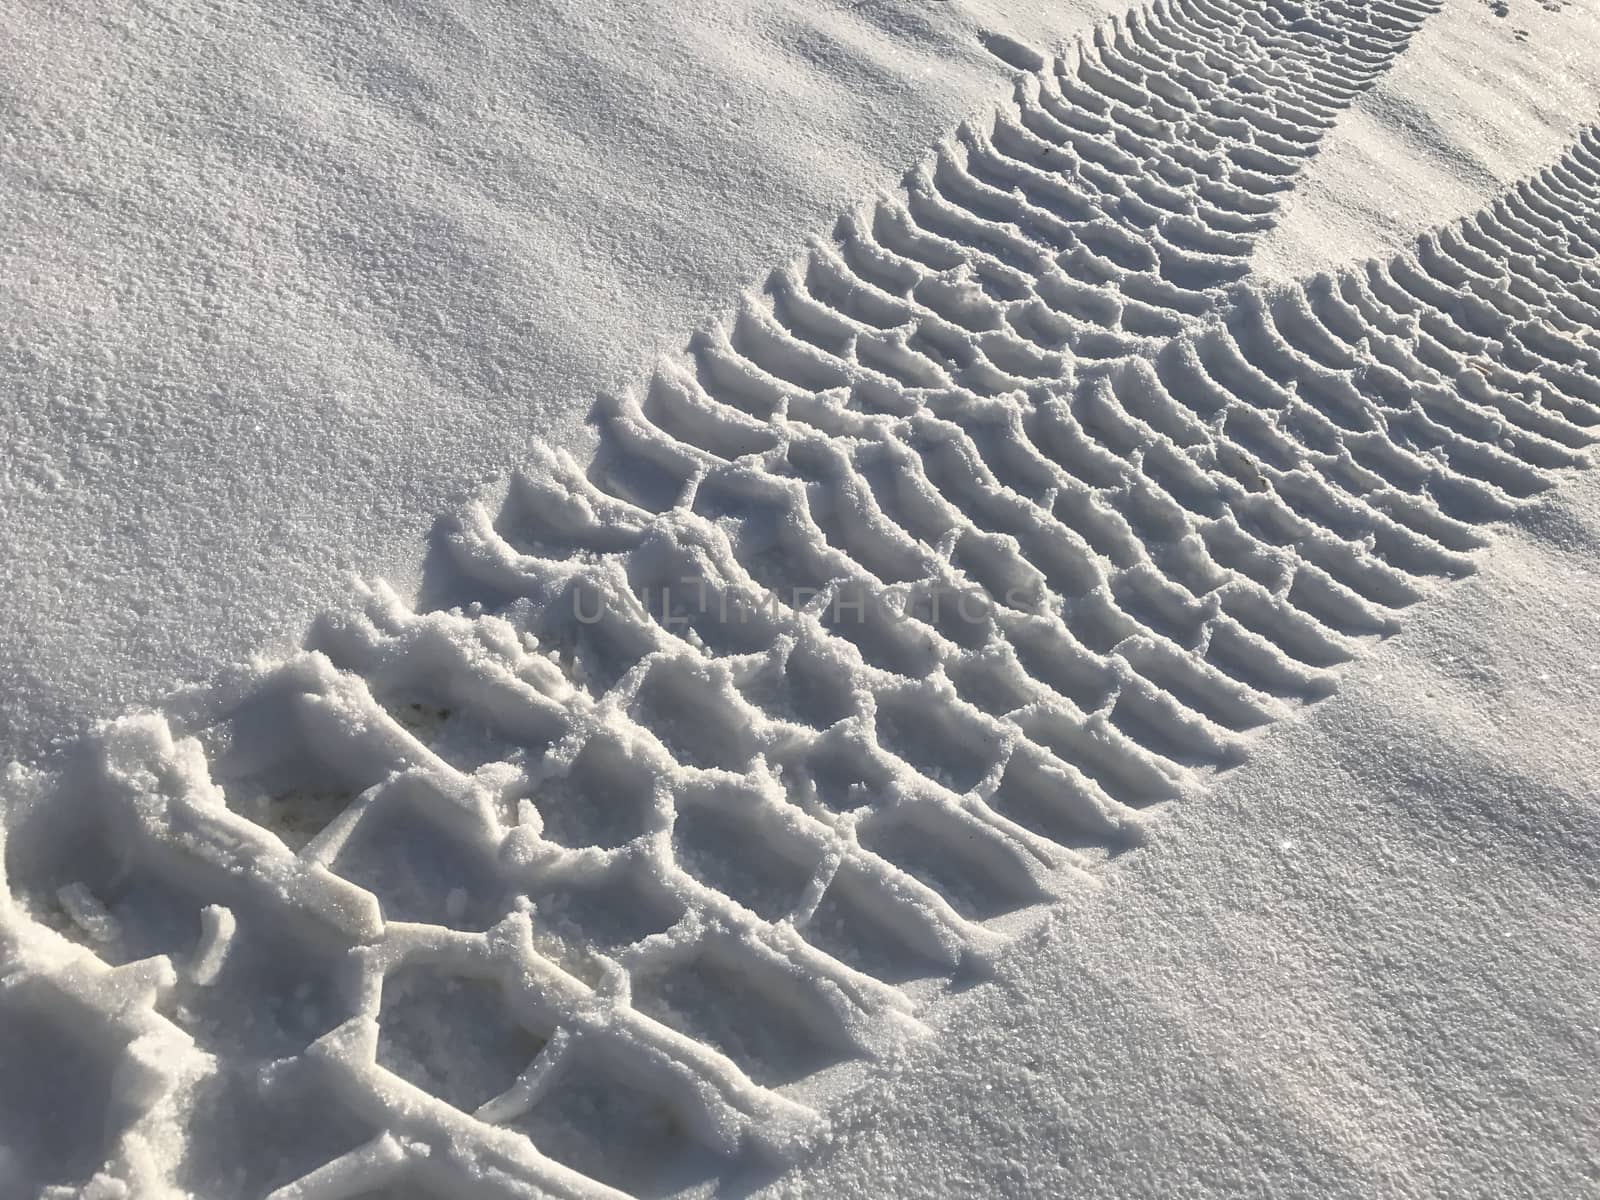 traces of the land vehicle on the snow